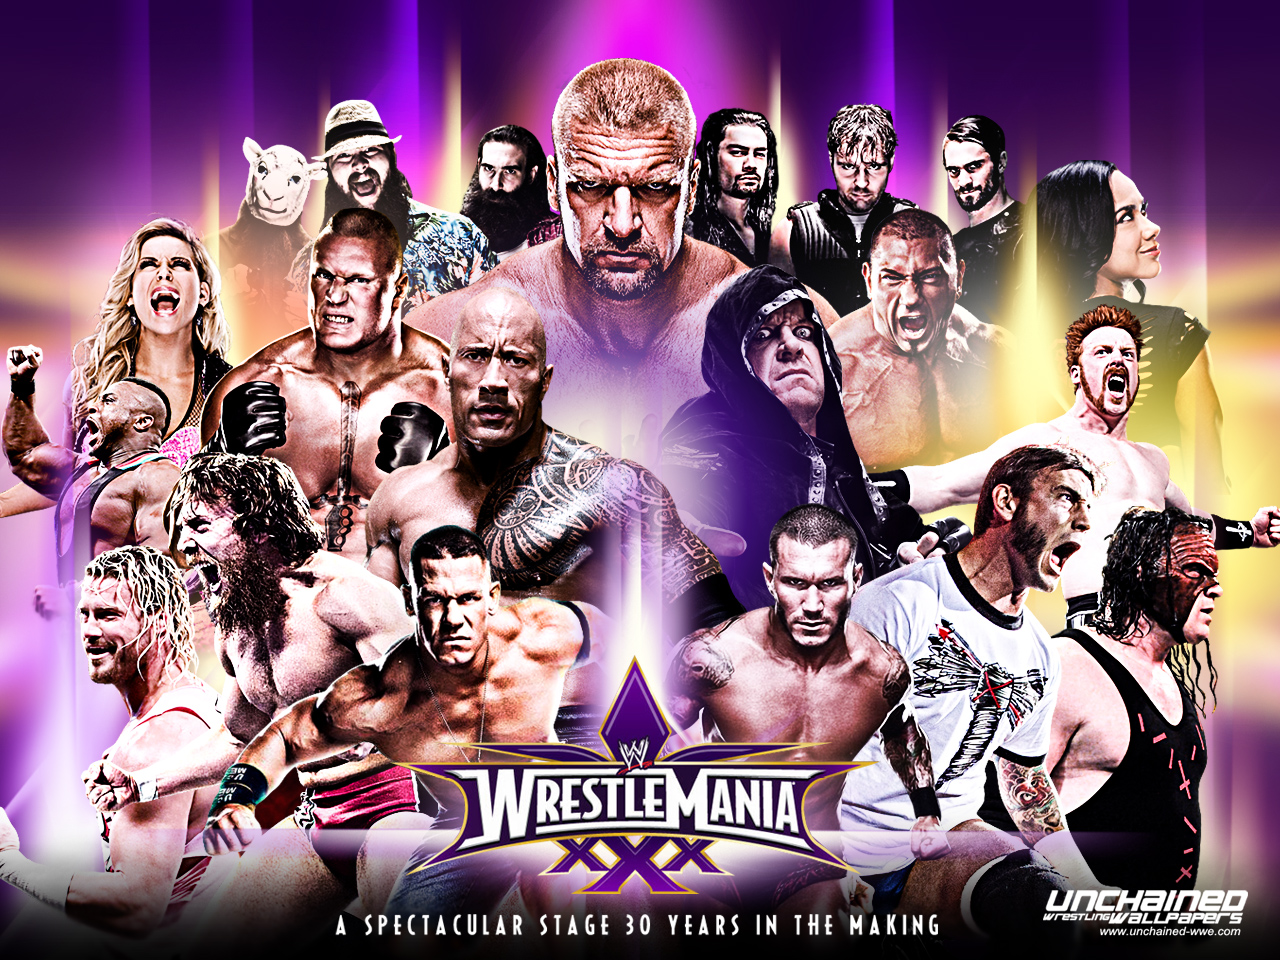 Wwe Wrestlemania 30 Years In The Making Wwe 壁紙 36463809 ファンポップ